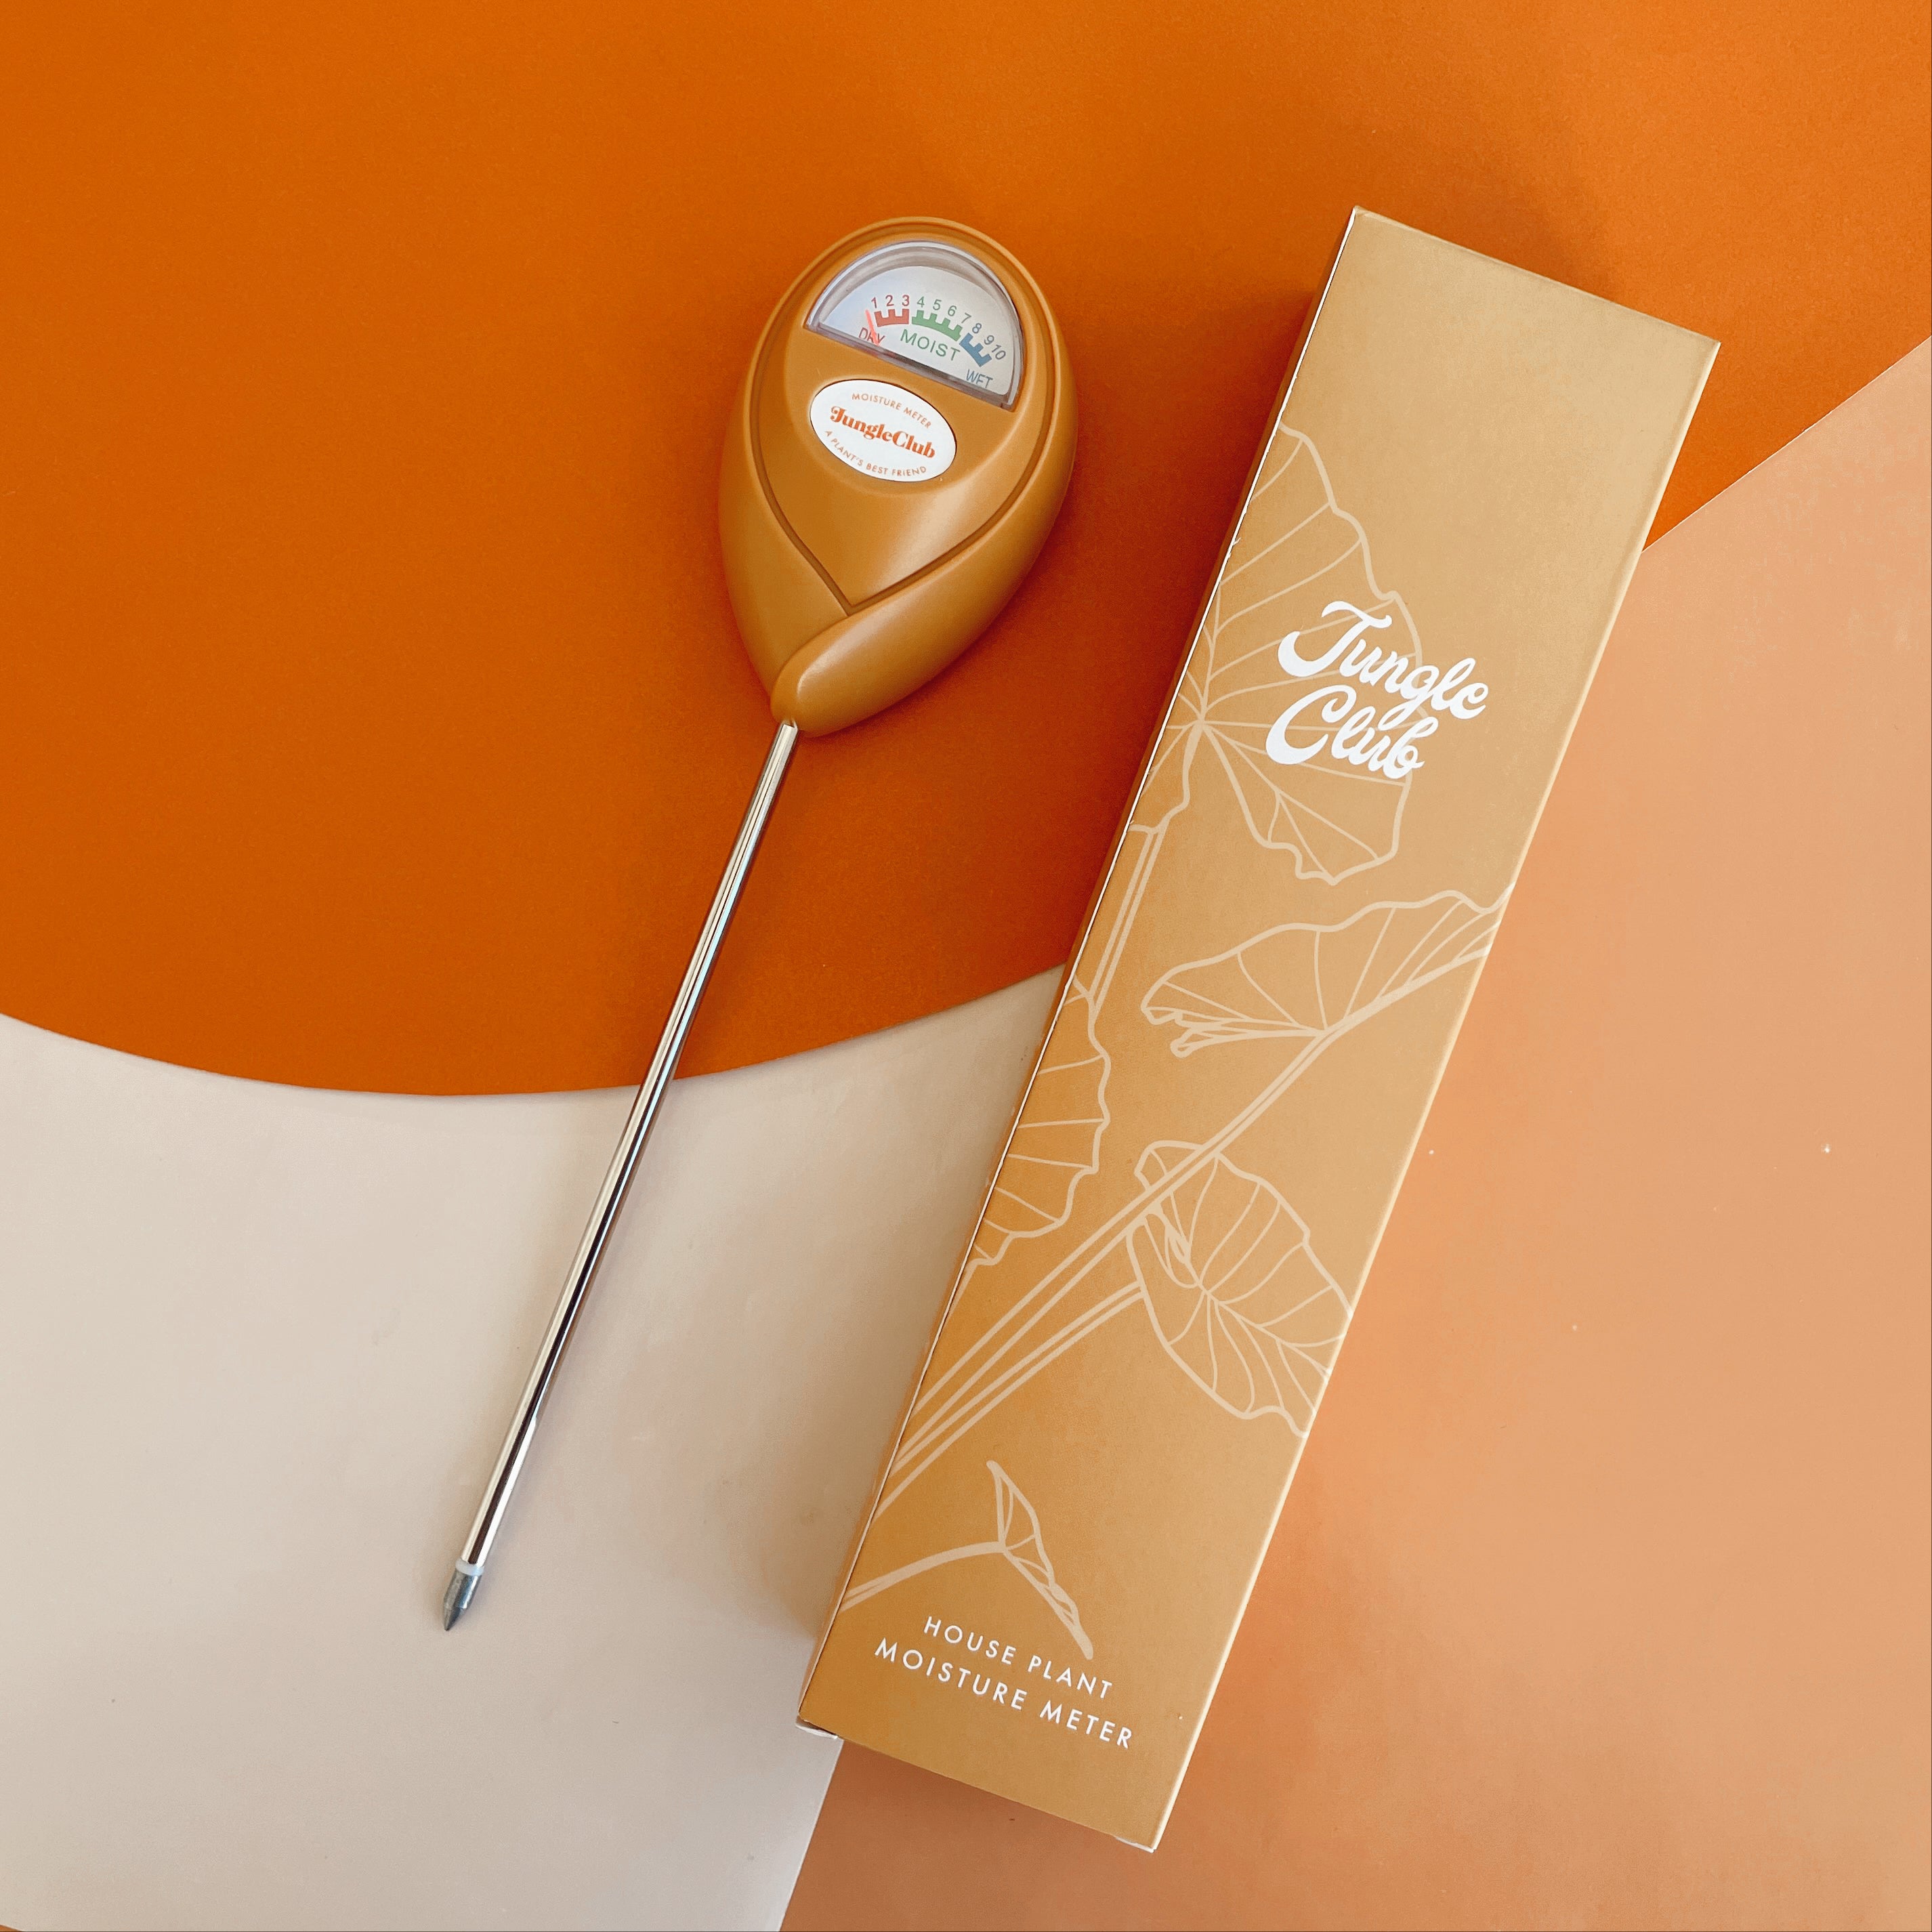 An orange moisture meter with dial at top that indicates dry moist of wet conditions for a plant lays on top of a bright orange background paper.  A peach colored paper intersects the right side of the image and the box that the moisture meter comes in sits on top of the paper. It reads "Jungle Club" and has the outlines of an alocasia grapically designed in white.